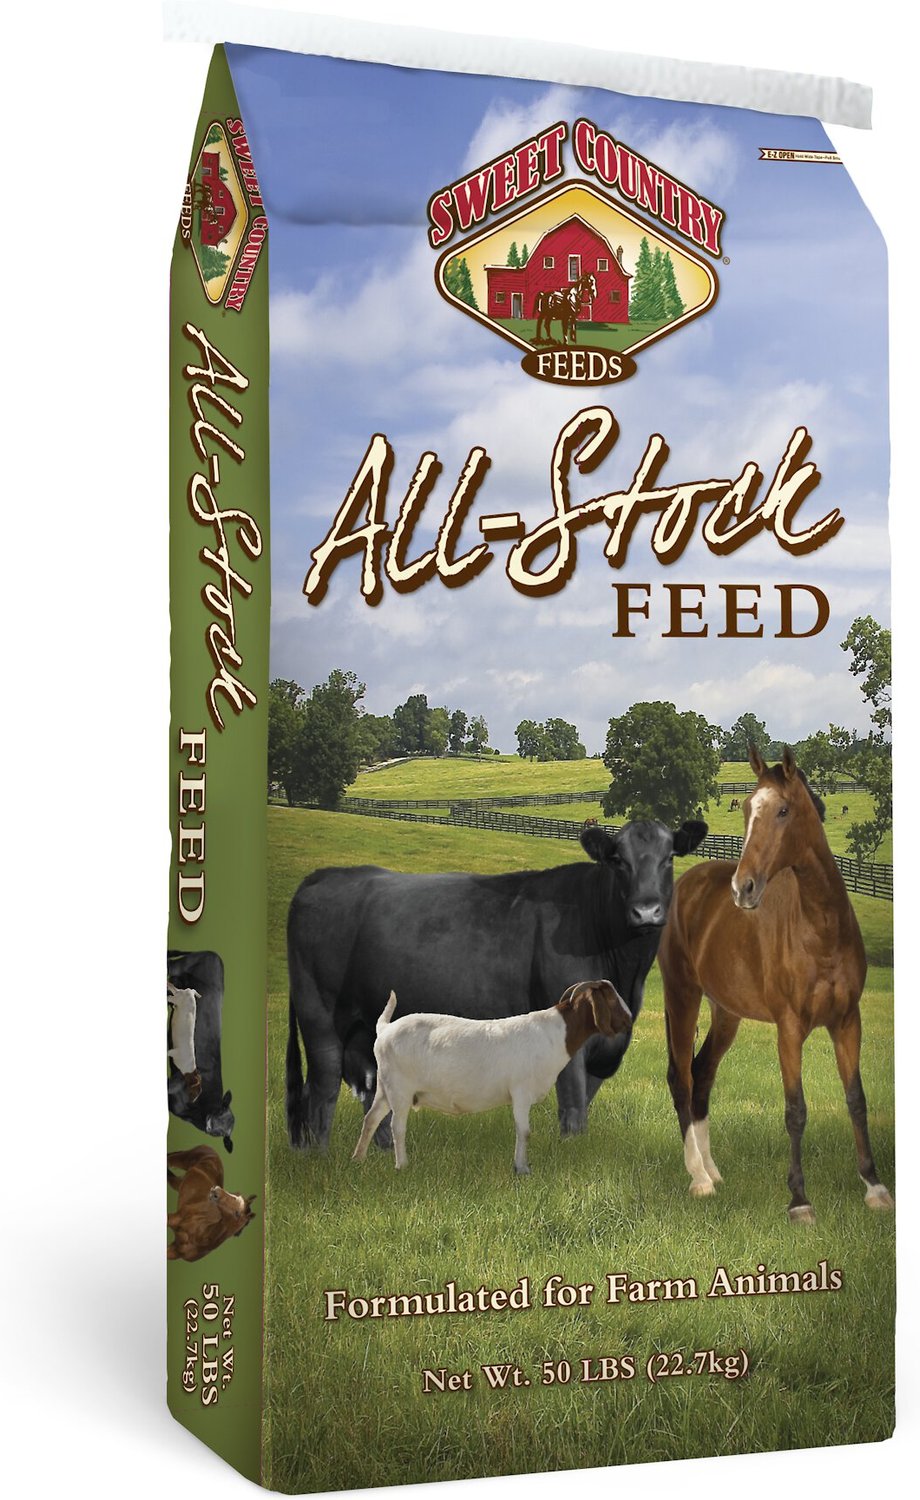 SWEET COUNTRY FEEDS 12% Protein All-Stock Feed Farm Animal & Horse Feed,  50-lb bag 